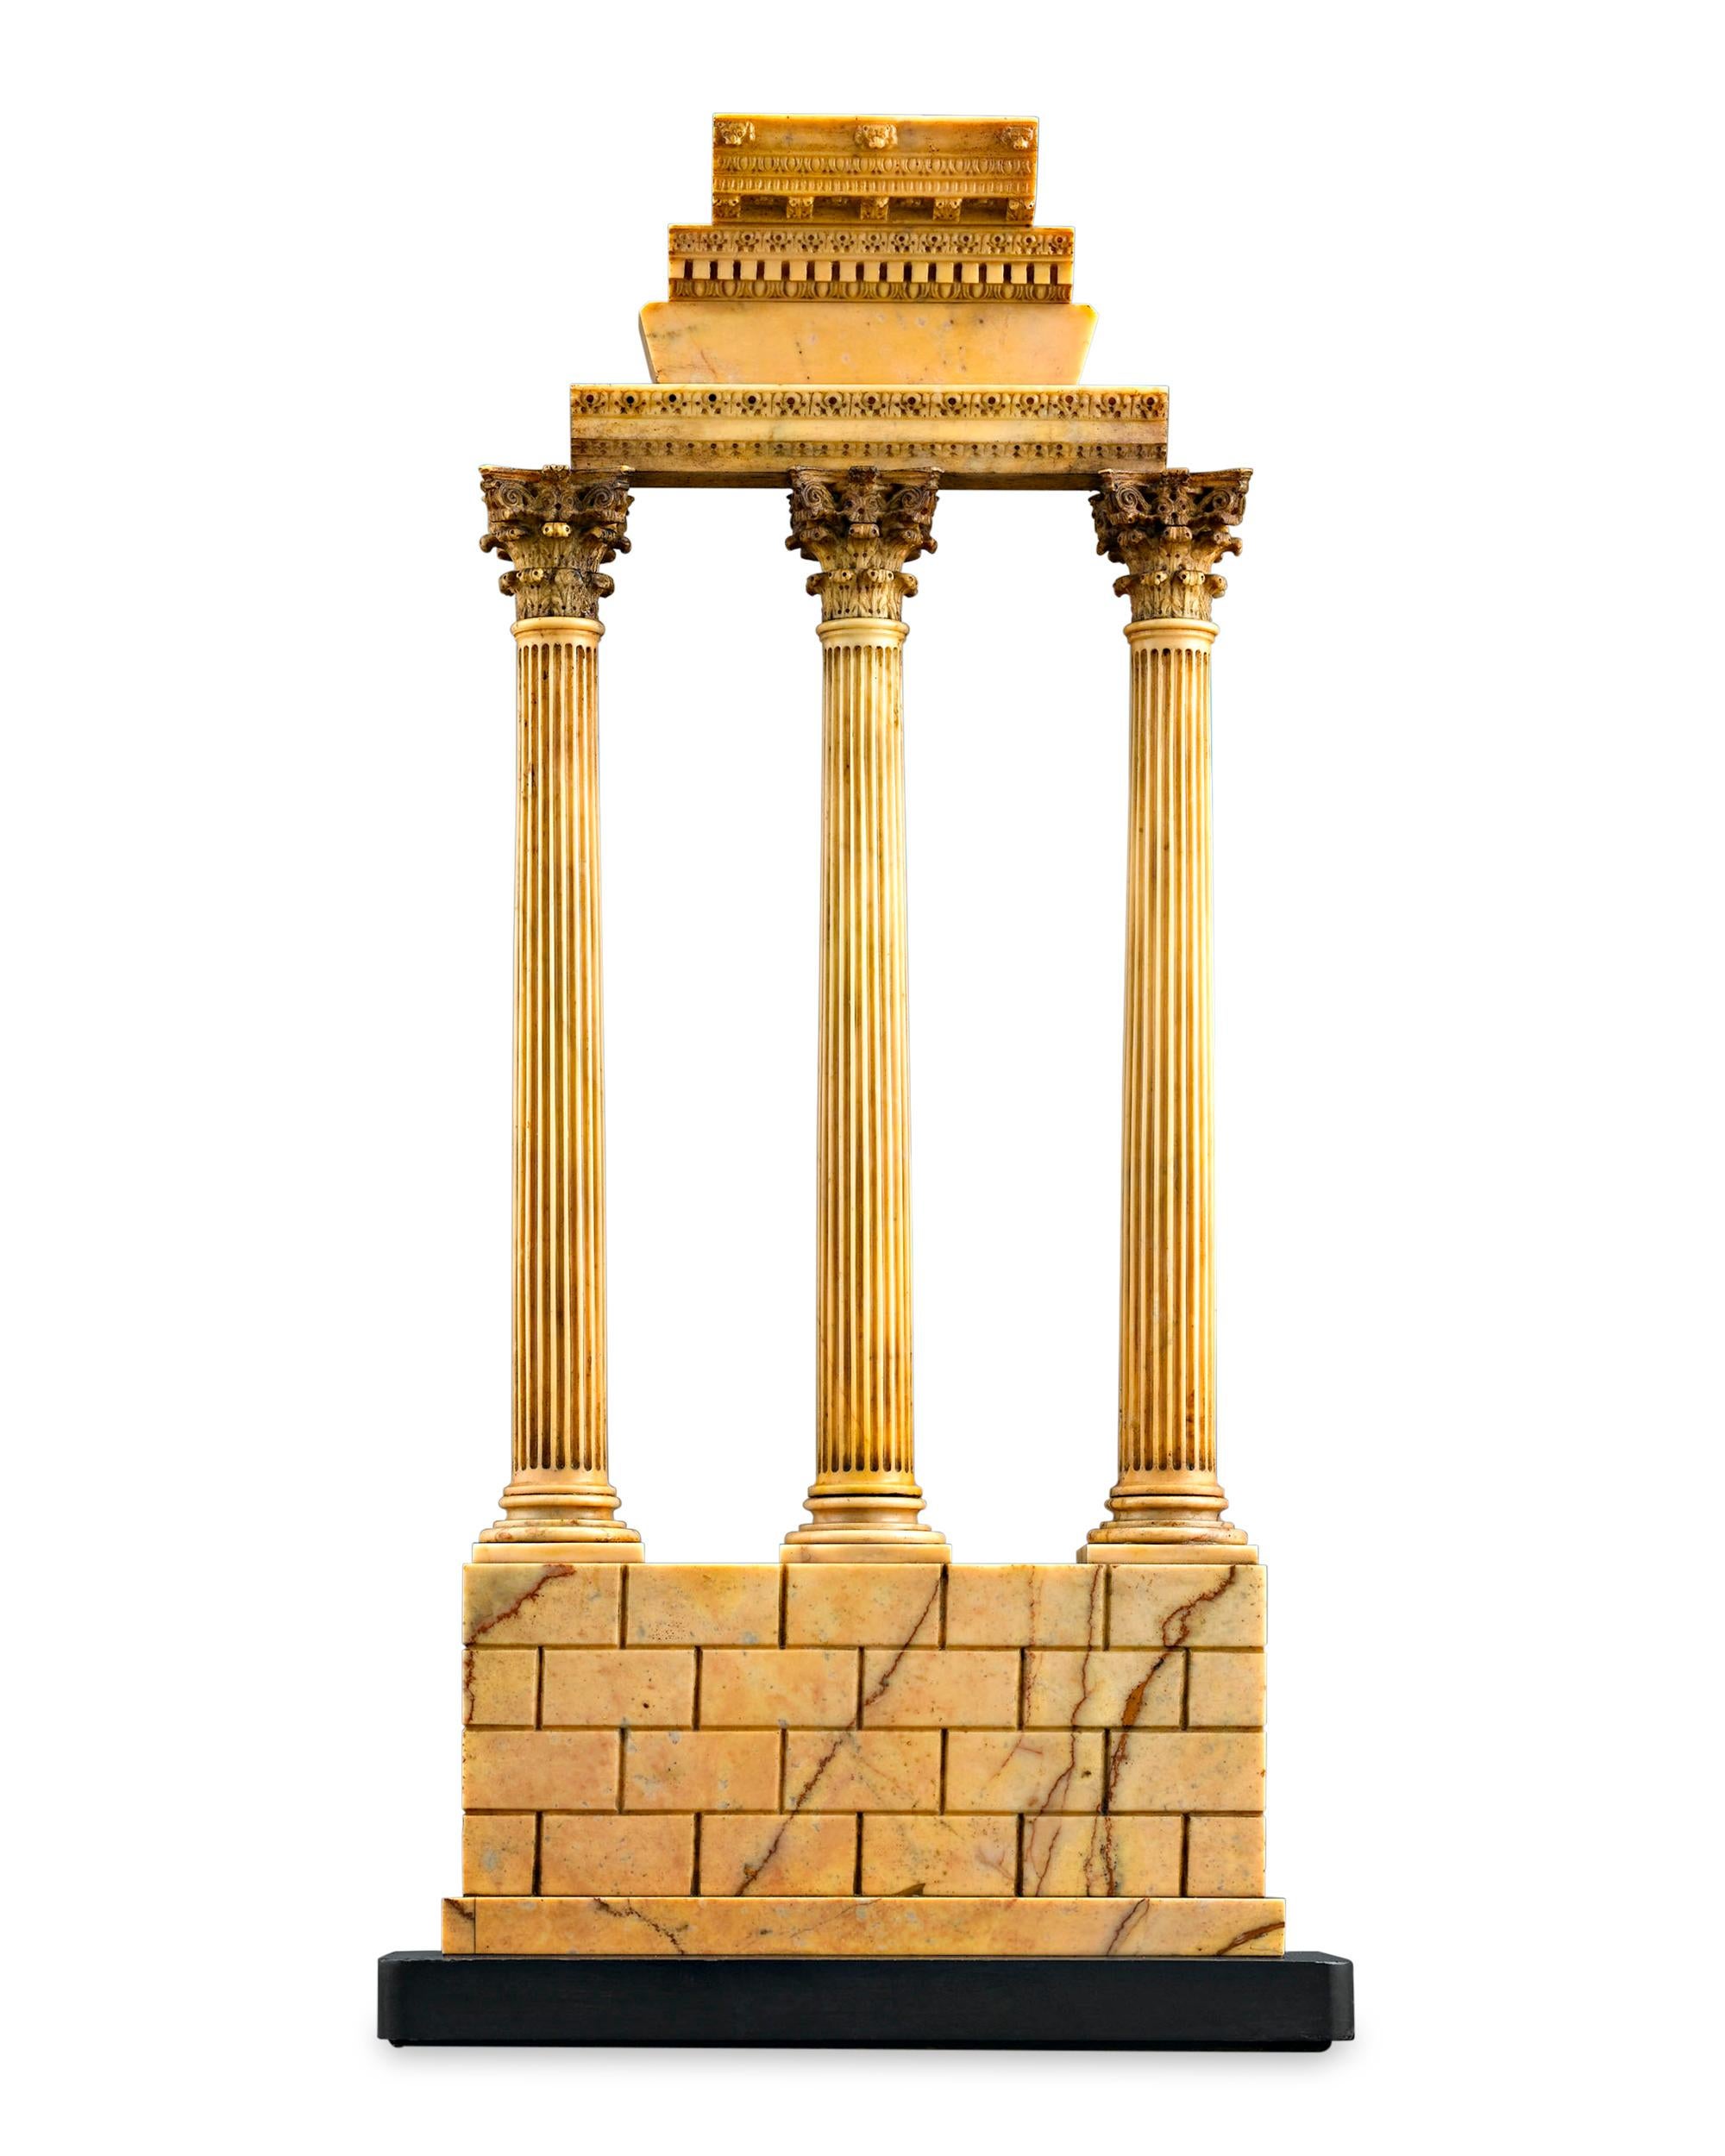 This model of the ruins of the Temple of caster and Pollux in Rome evokes the lasting grandeur of ancient Rome. Today just three massive columns remain from the ancient edifice, which is perfectly replicated here down to the smallest detail.